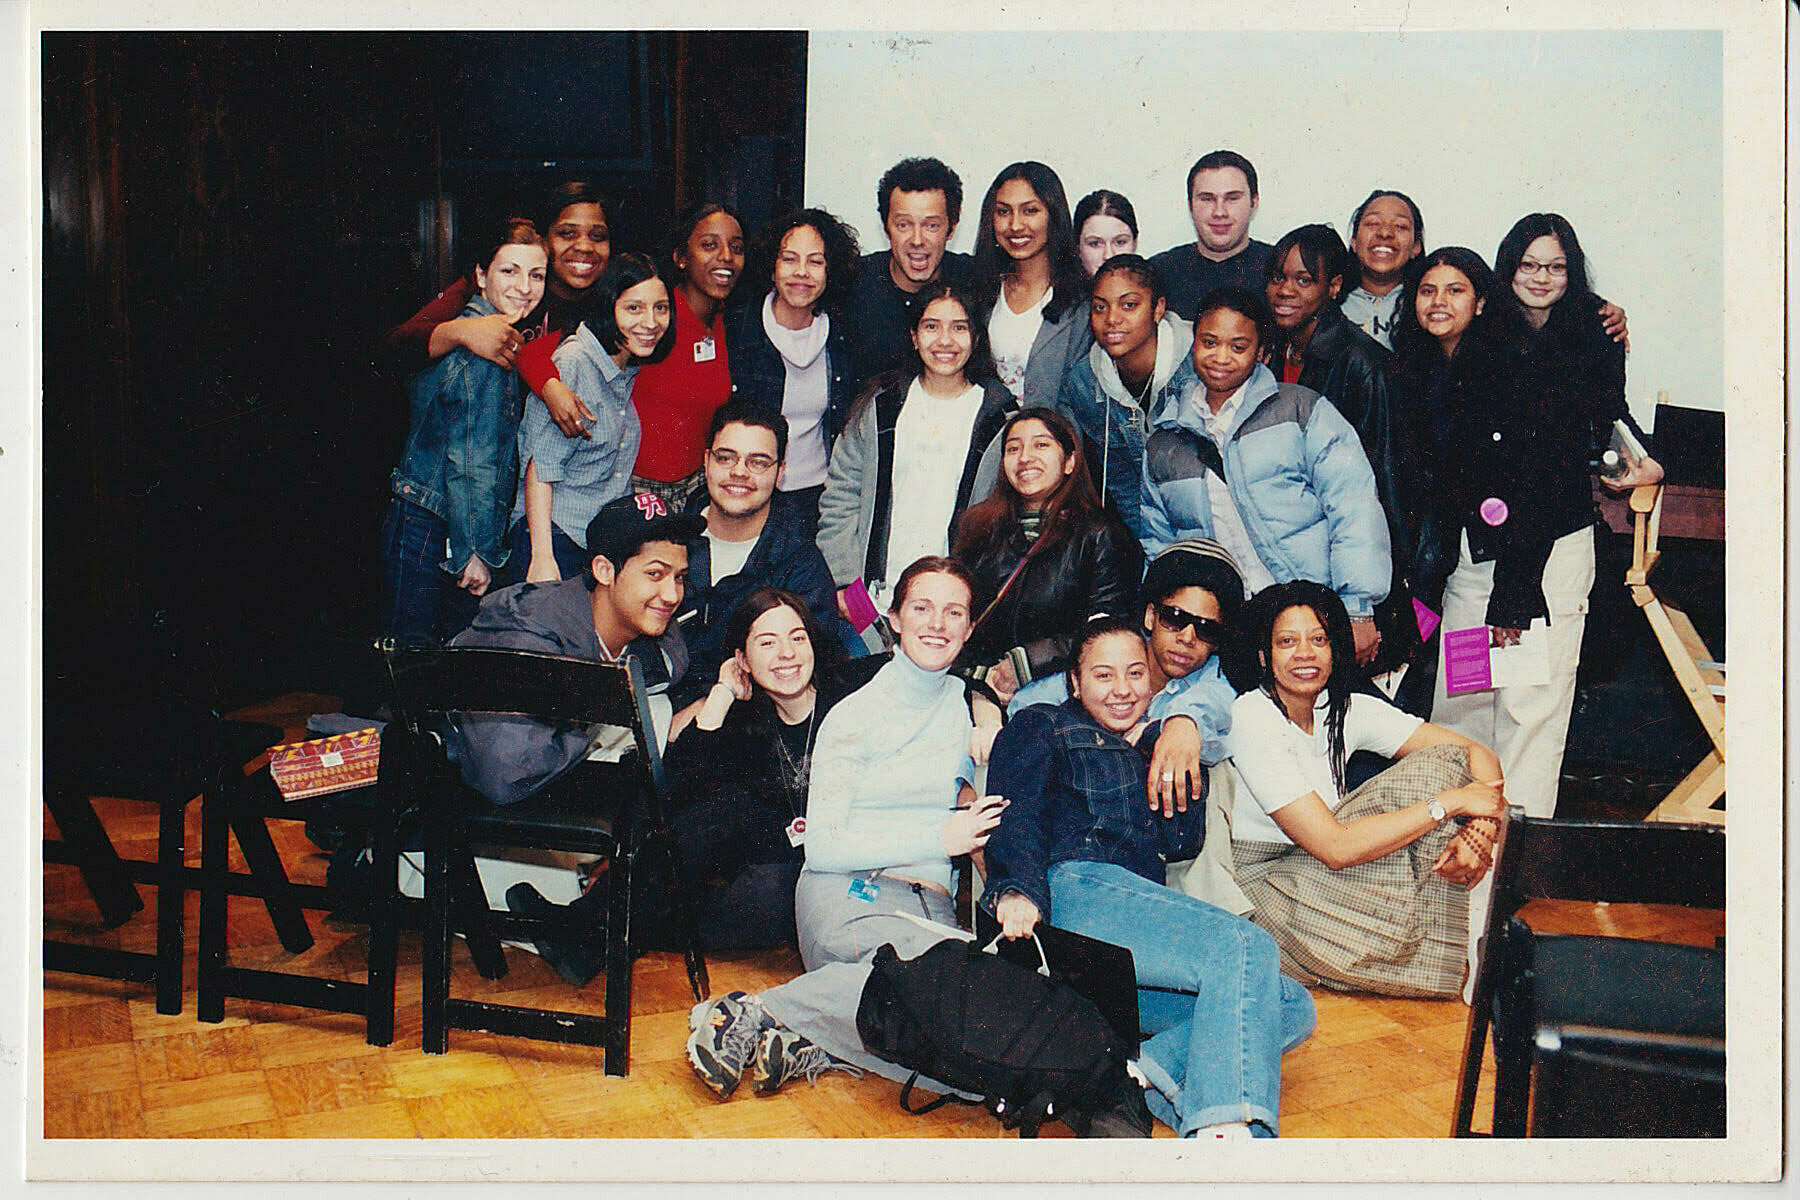 Group photo of Youth Insight Participants at the Whitney Museum in 2000-2001.